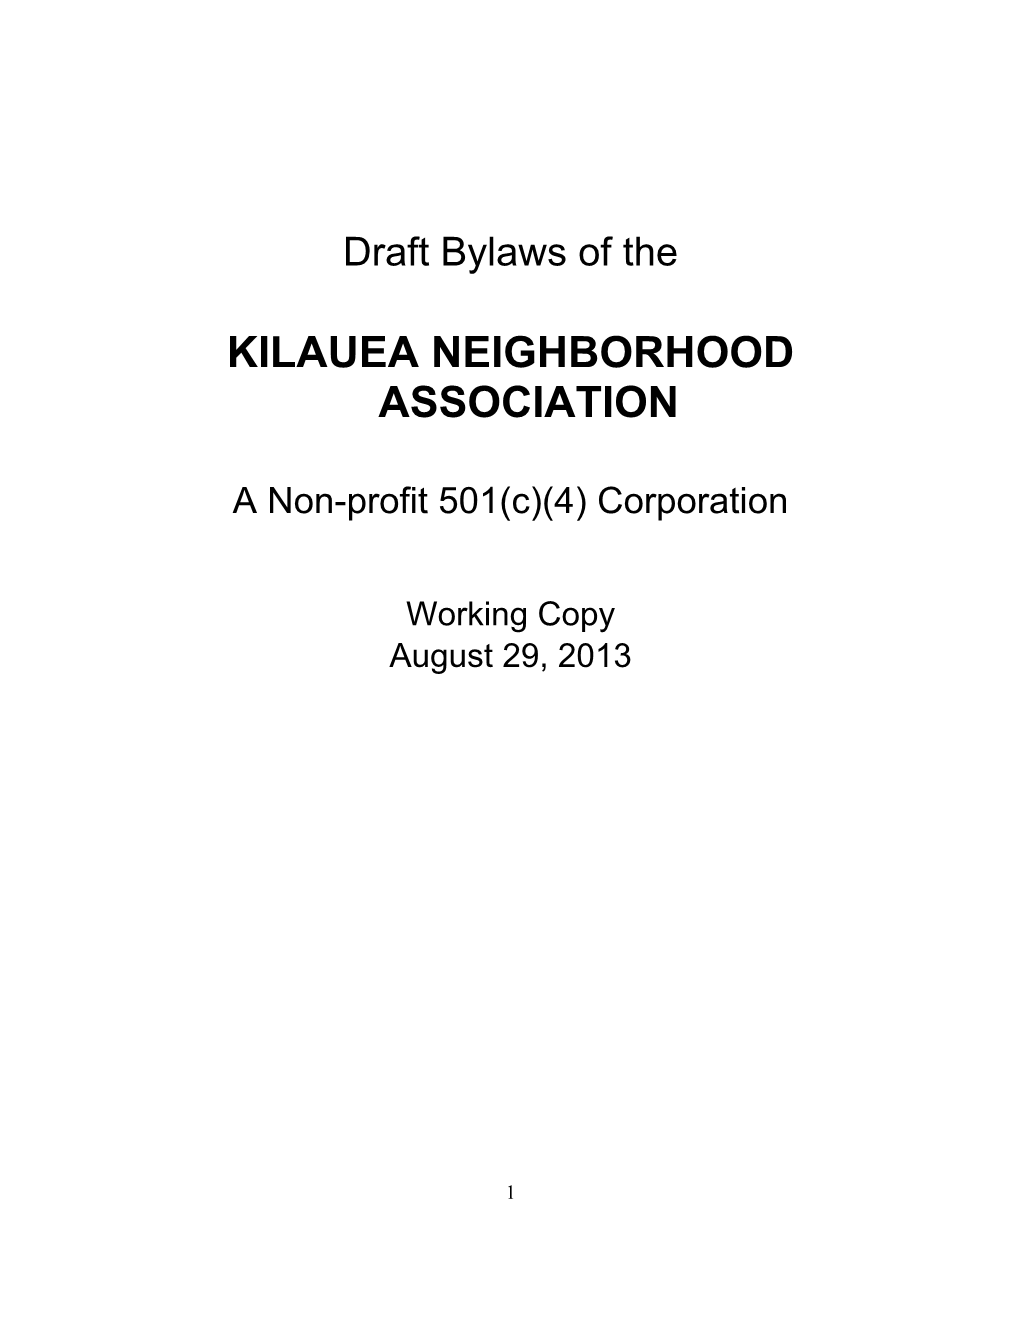 Draft Bylaws of The